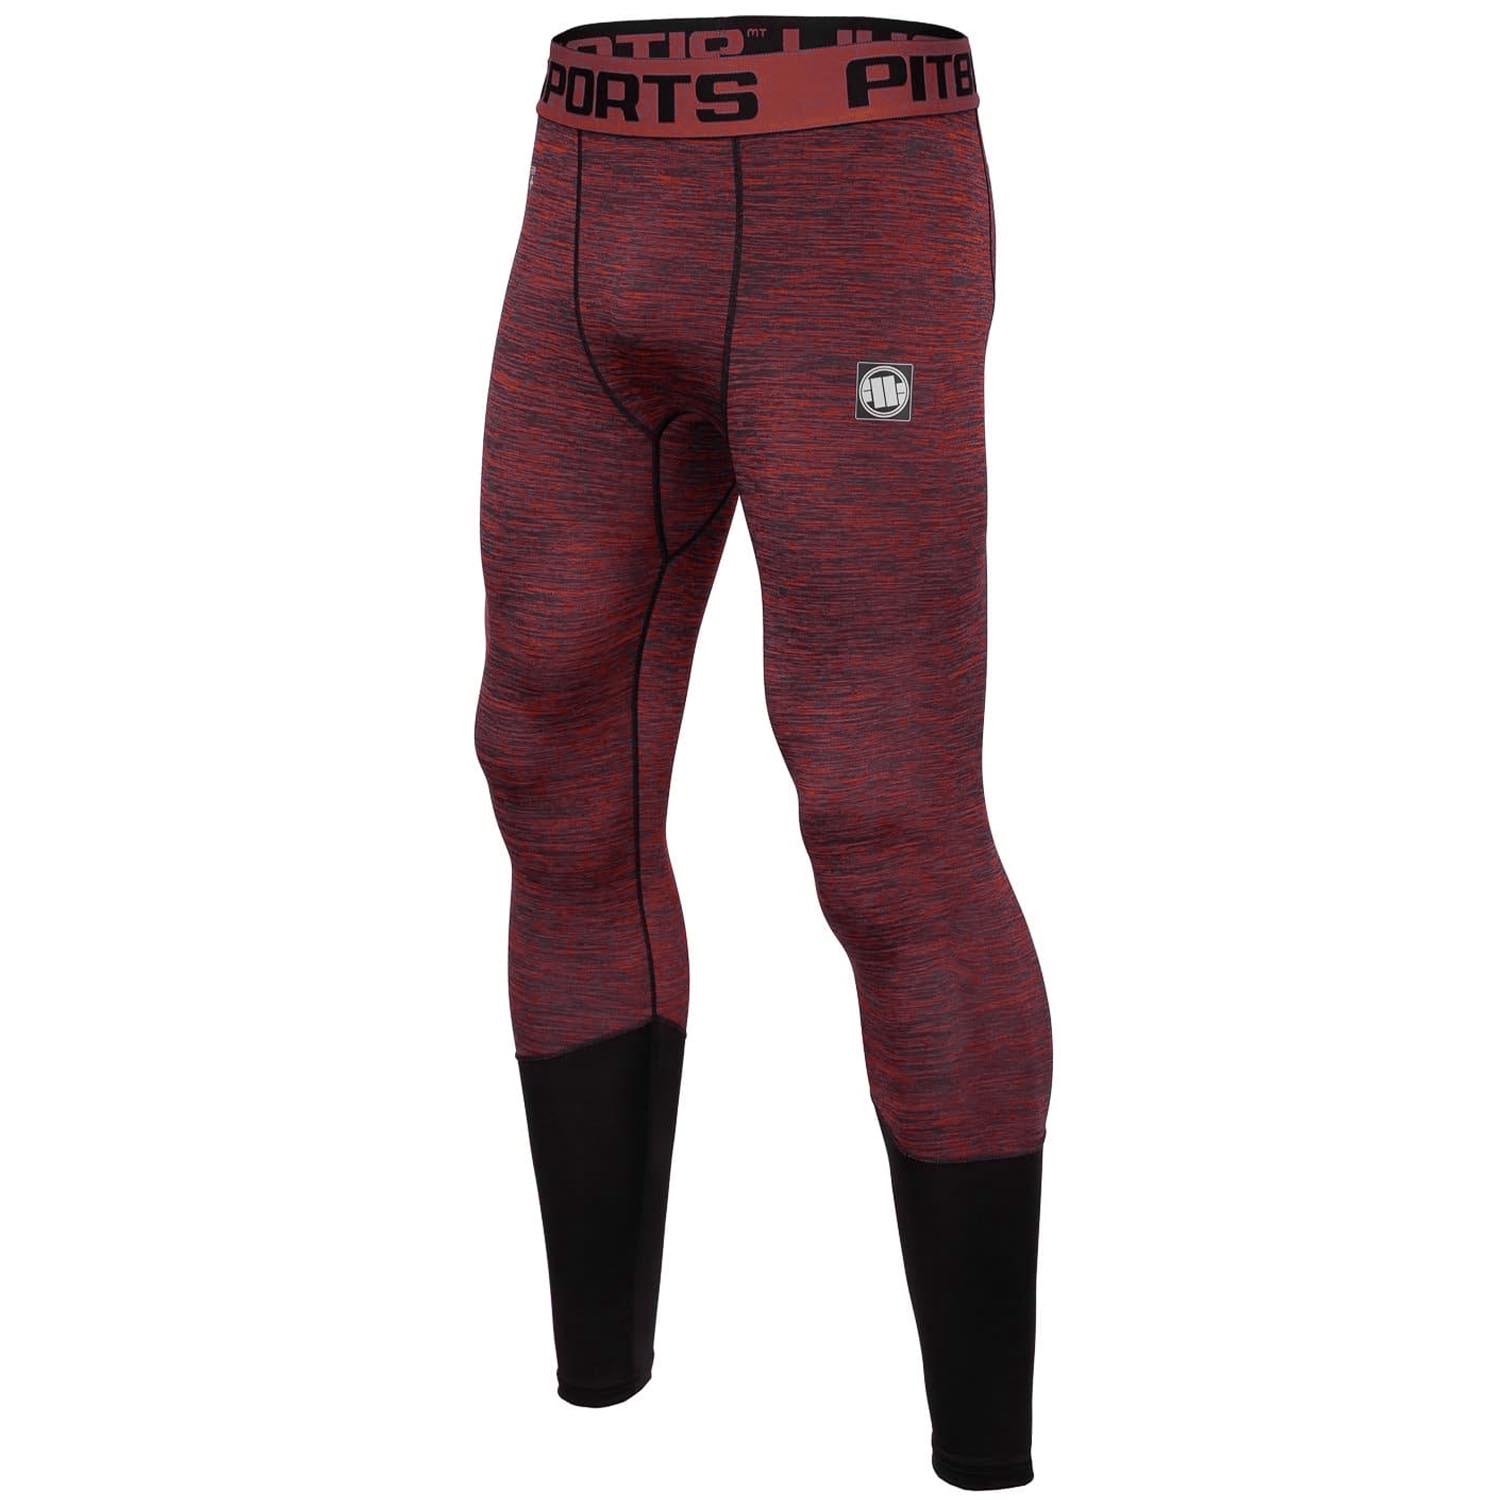 Pit Bull West Coast Compression Pants, Performance, Small Logo, dunkelrot